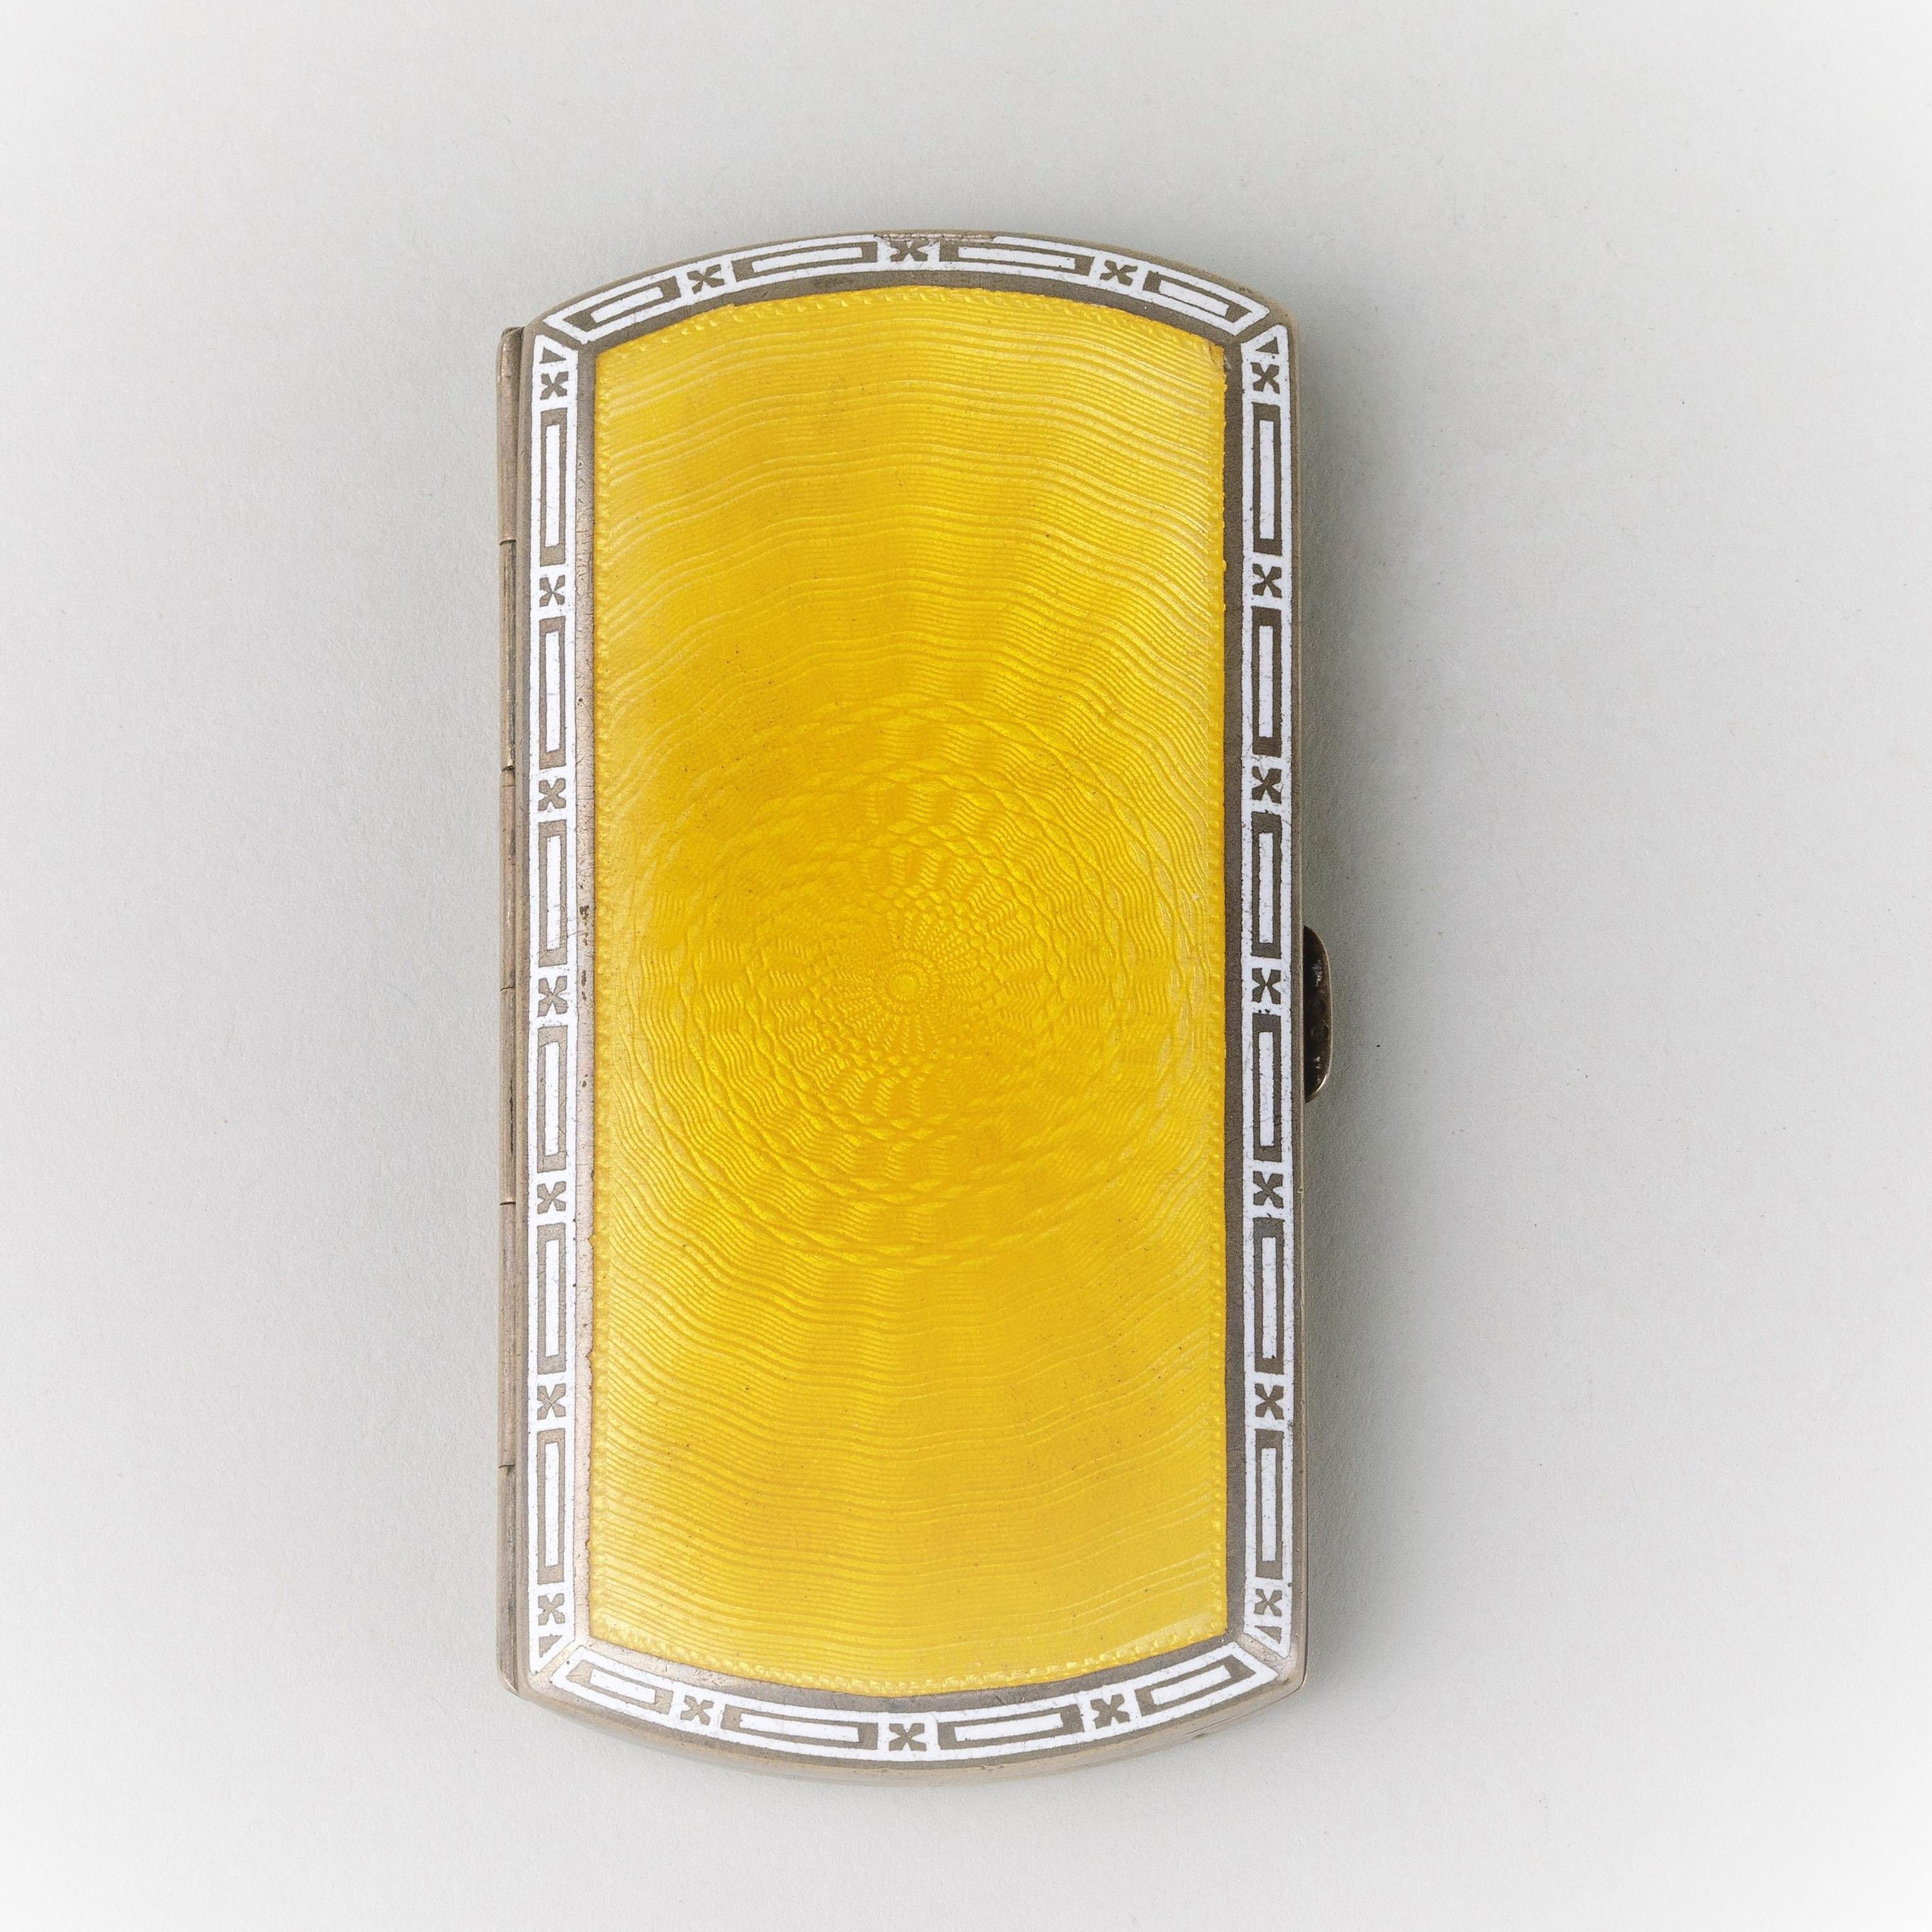 Vintage 1924 Silver Guilloche Translucent Yellow Enamel Cigarette Case 3.65 Inch In Good Condition For Sale In New York, NY